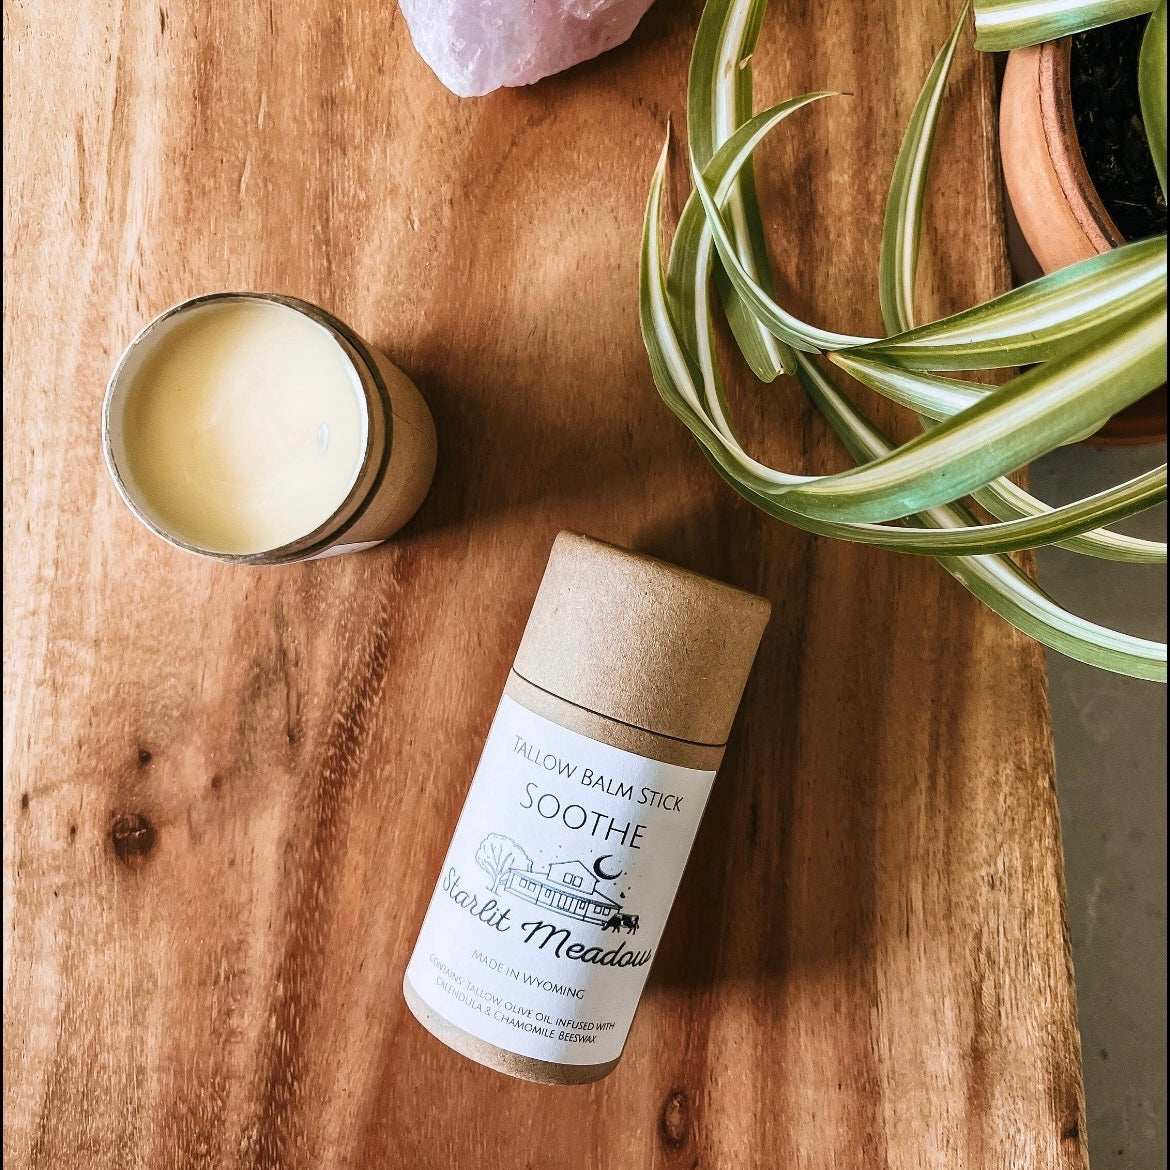 Chamomile & Calendula infused Grass Fed Tallow Balm Stick -Soothe